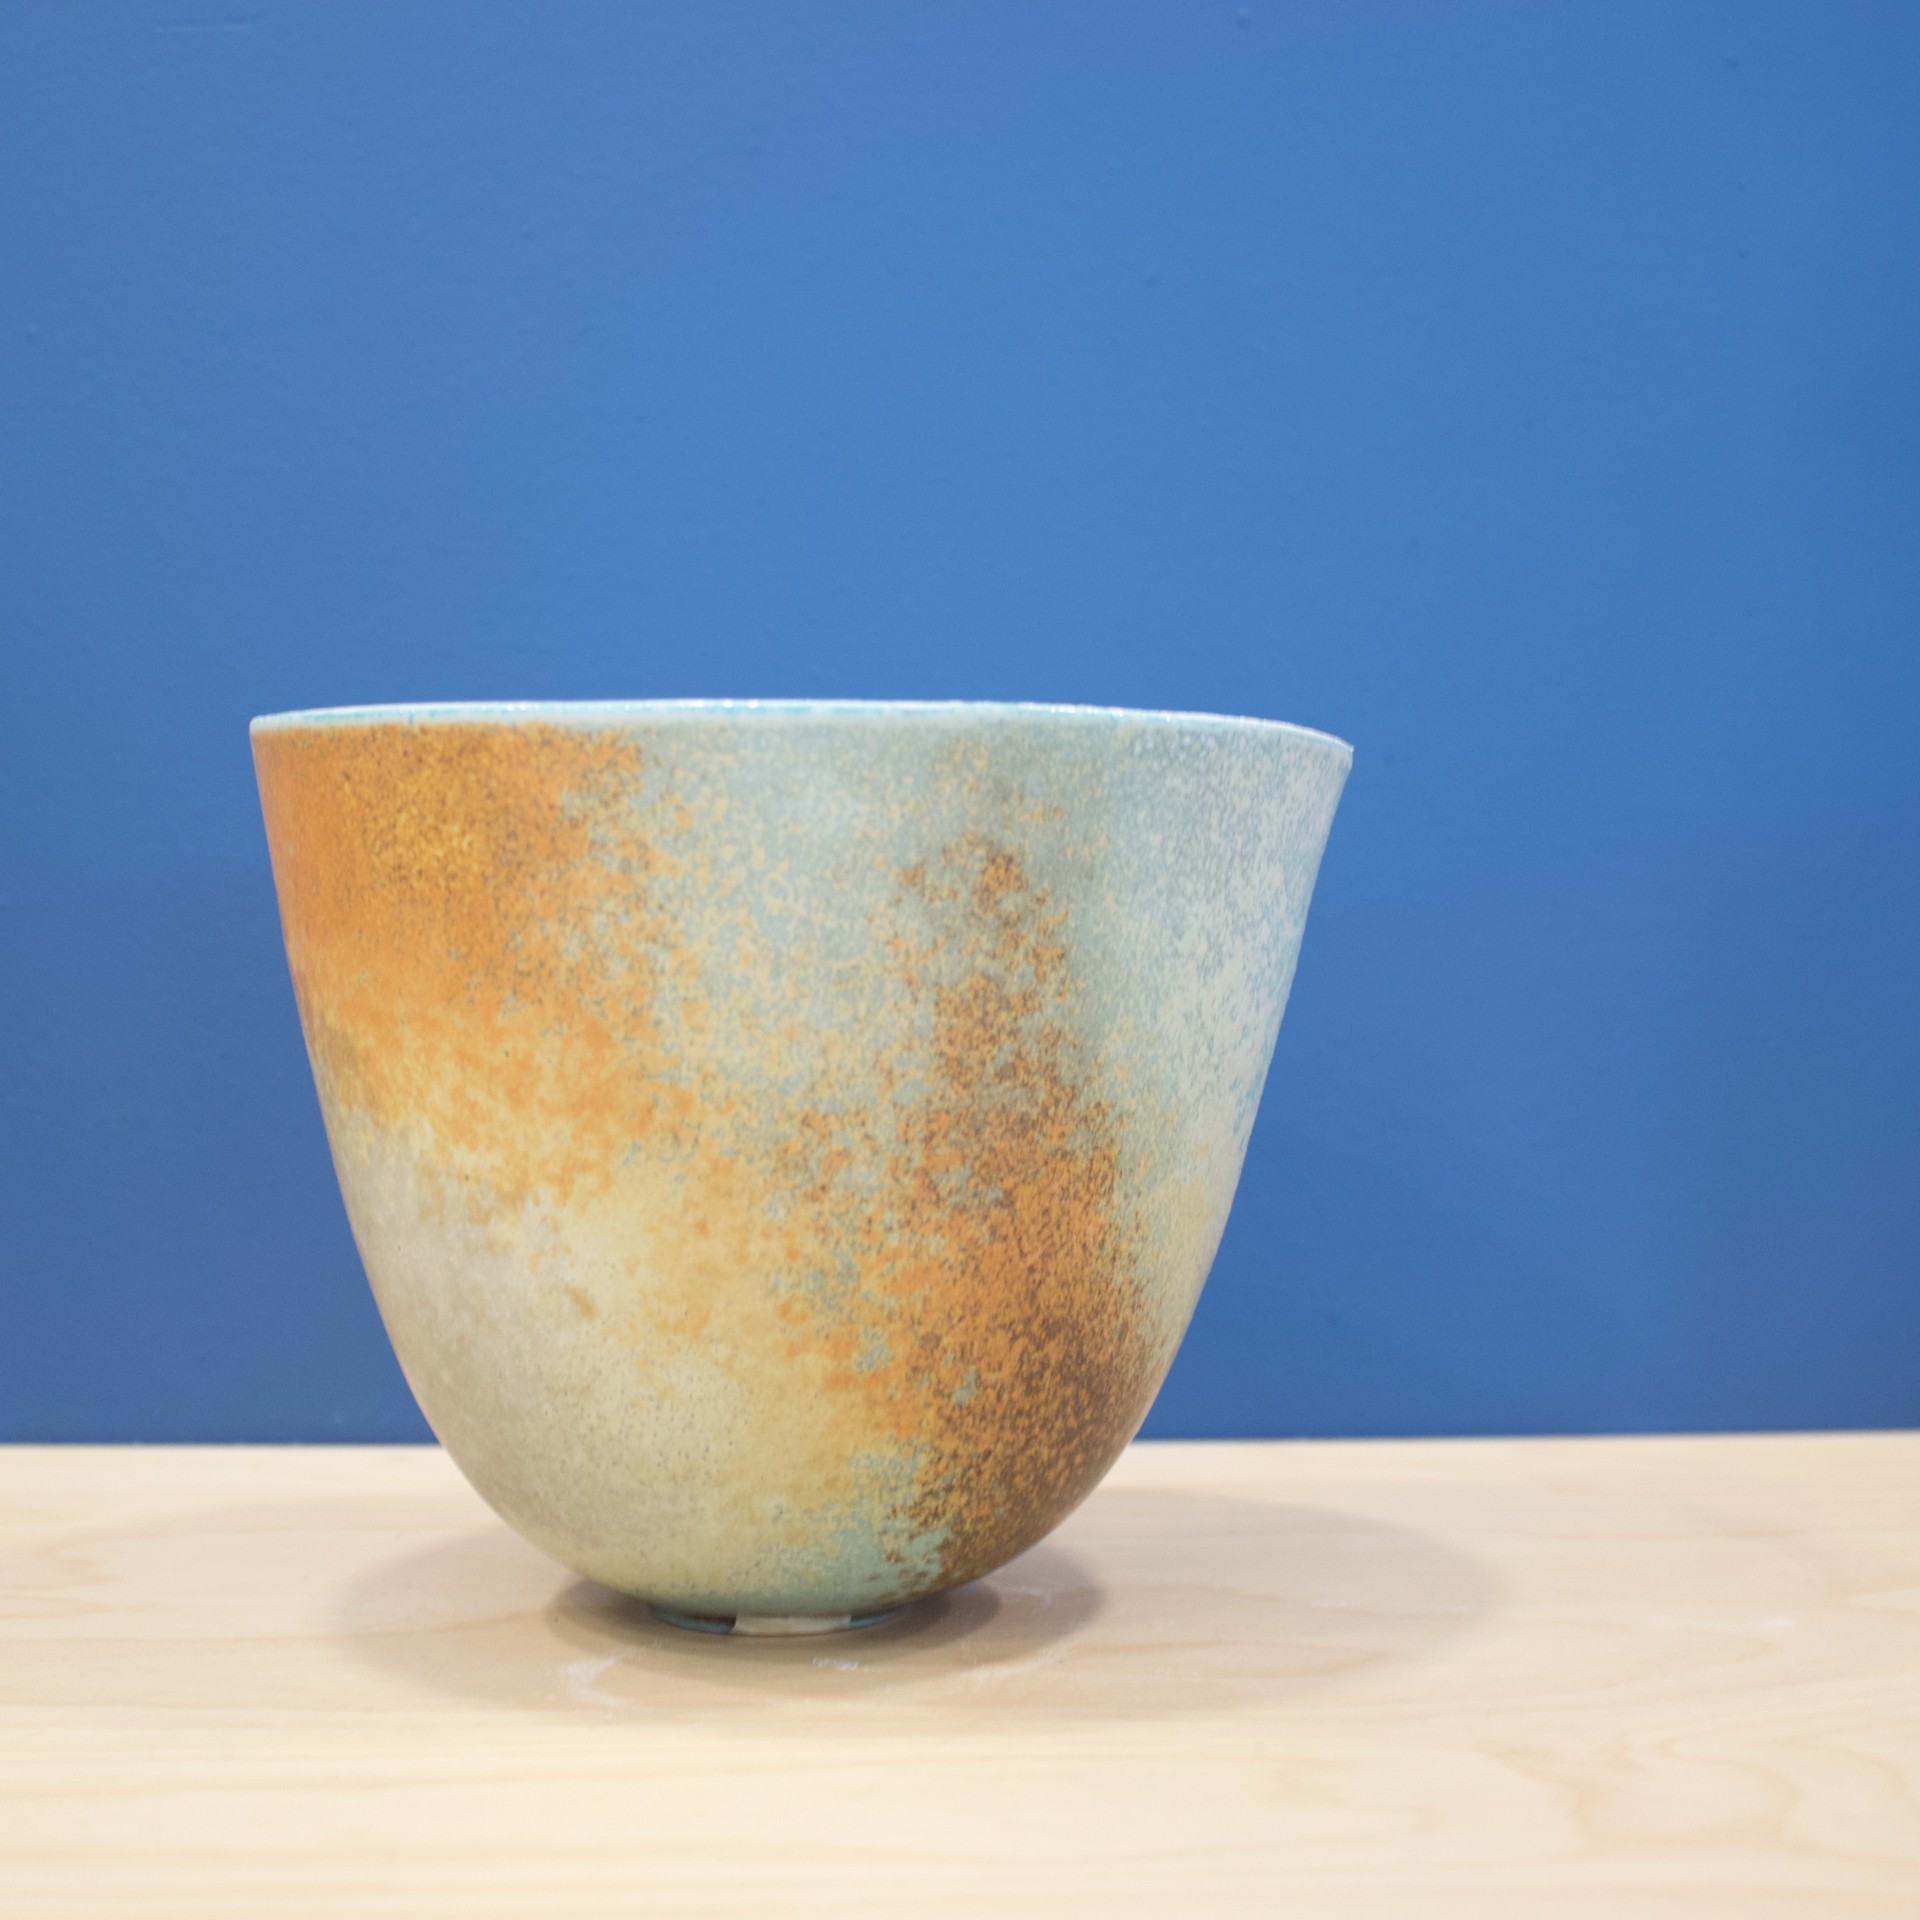 Russet Conical Vessel by Jack Doherty